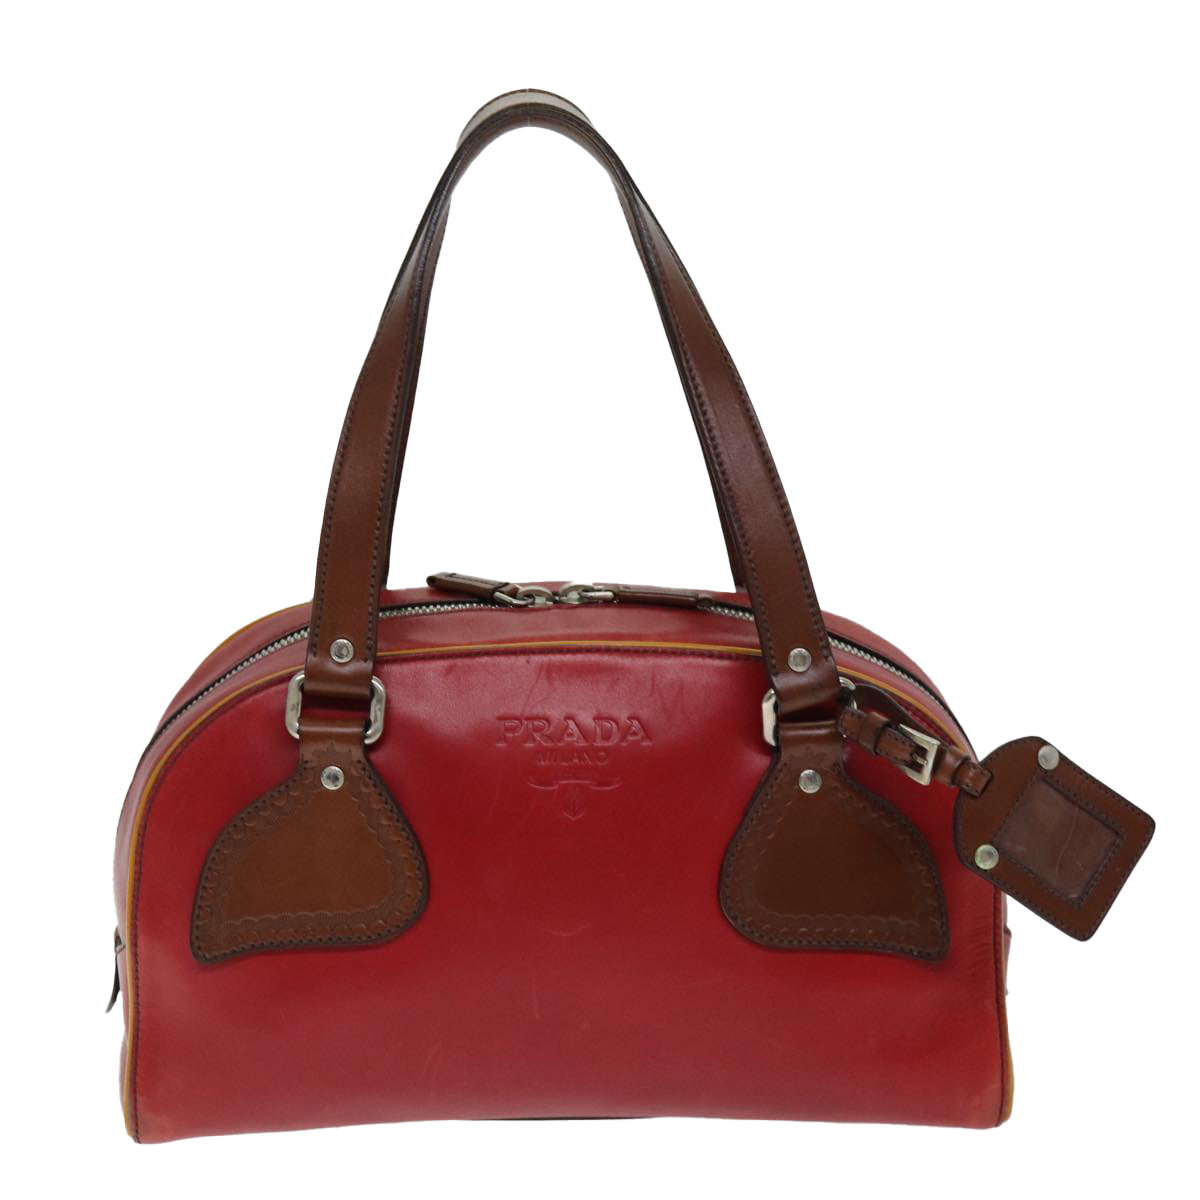 PRADA Hand Bag Leather Red Auth 74713